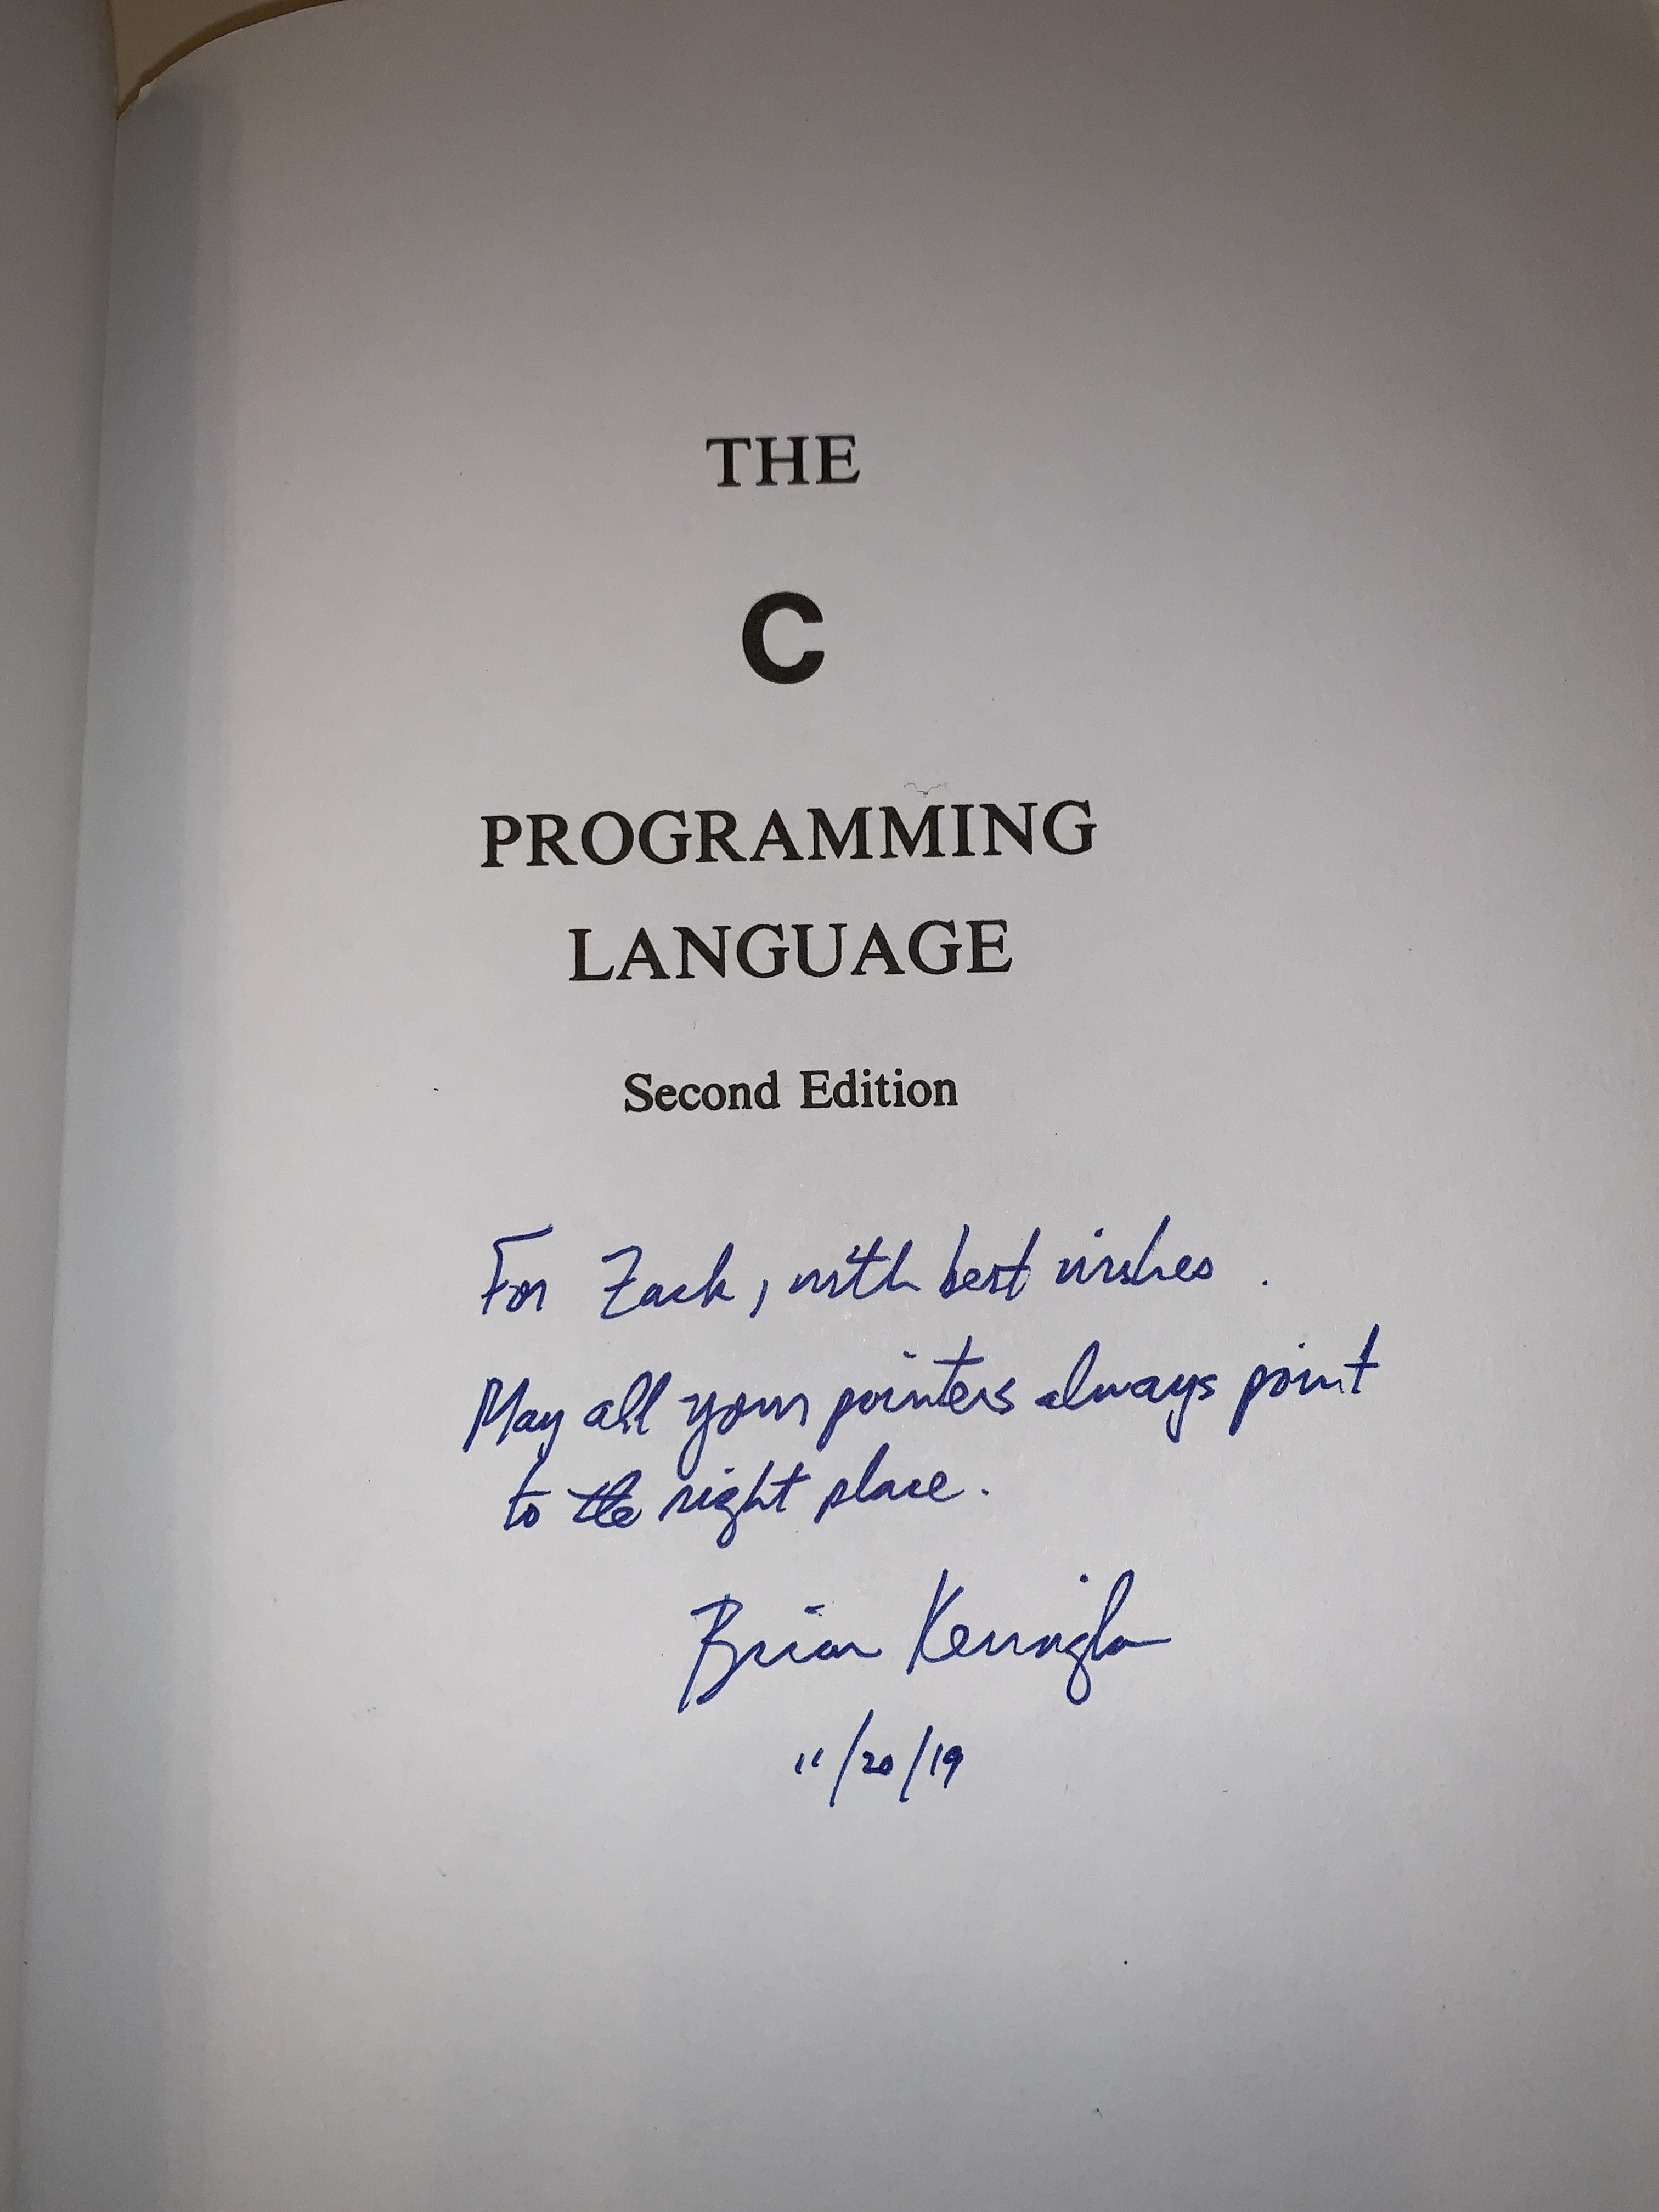 The C Programming Language, signed by Brian Kergnighan